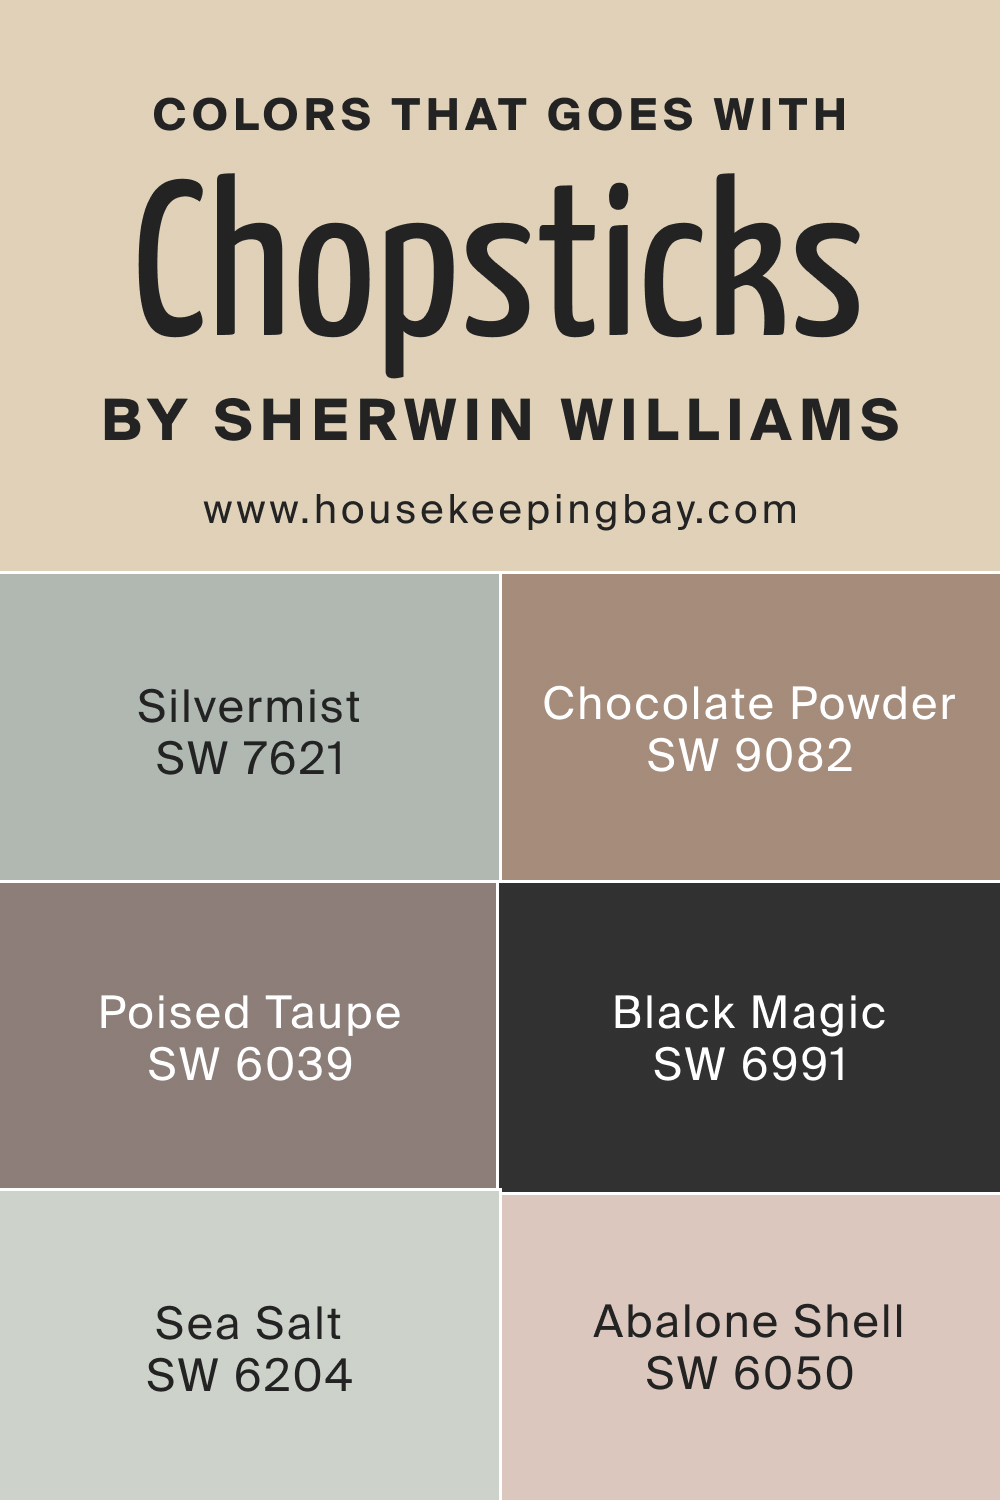 Colors that goes with SW Chopsticks by Sherwin Williams